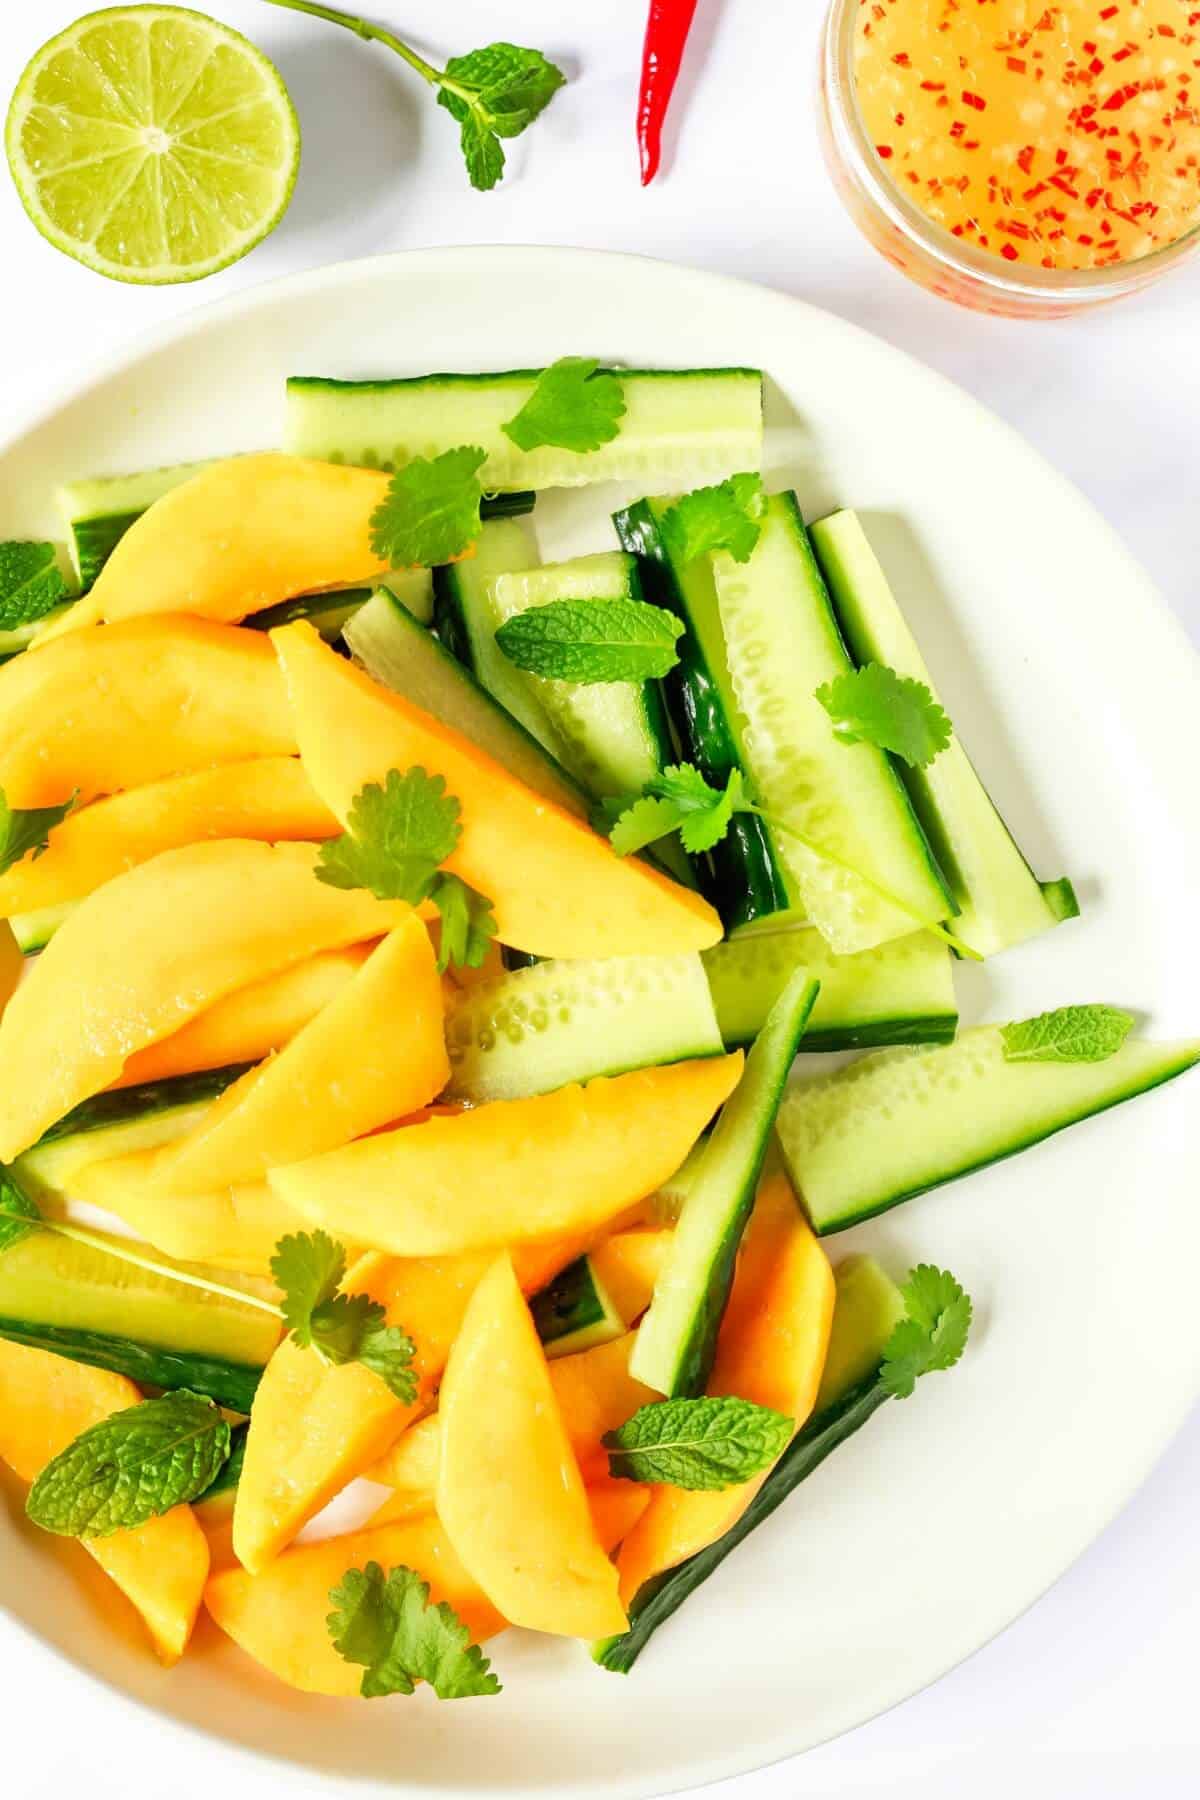 Slices of mango and cucumber sprinkled with fresh herbs; a chopped chilli based dressing on the side.